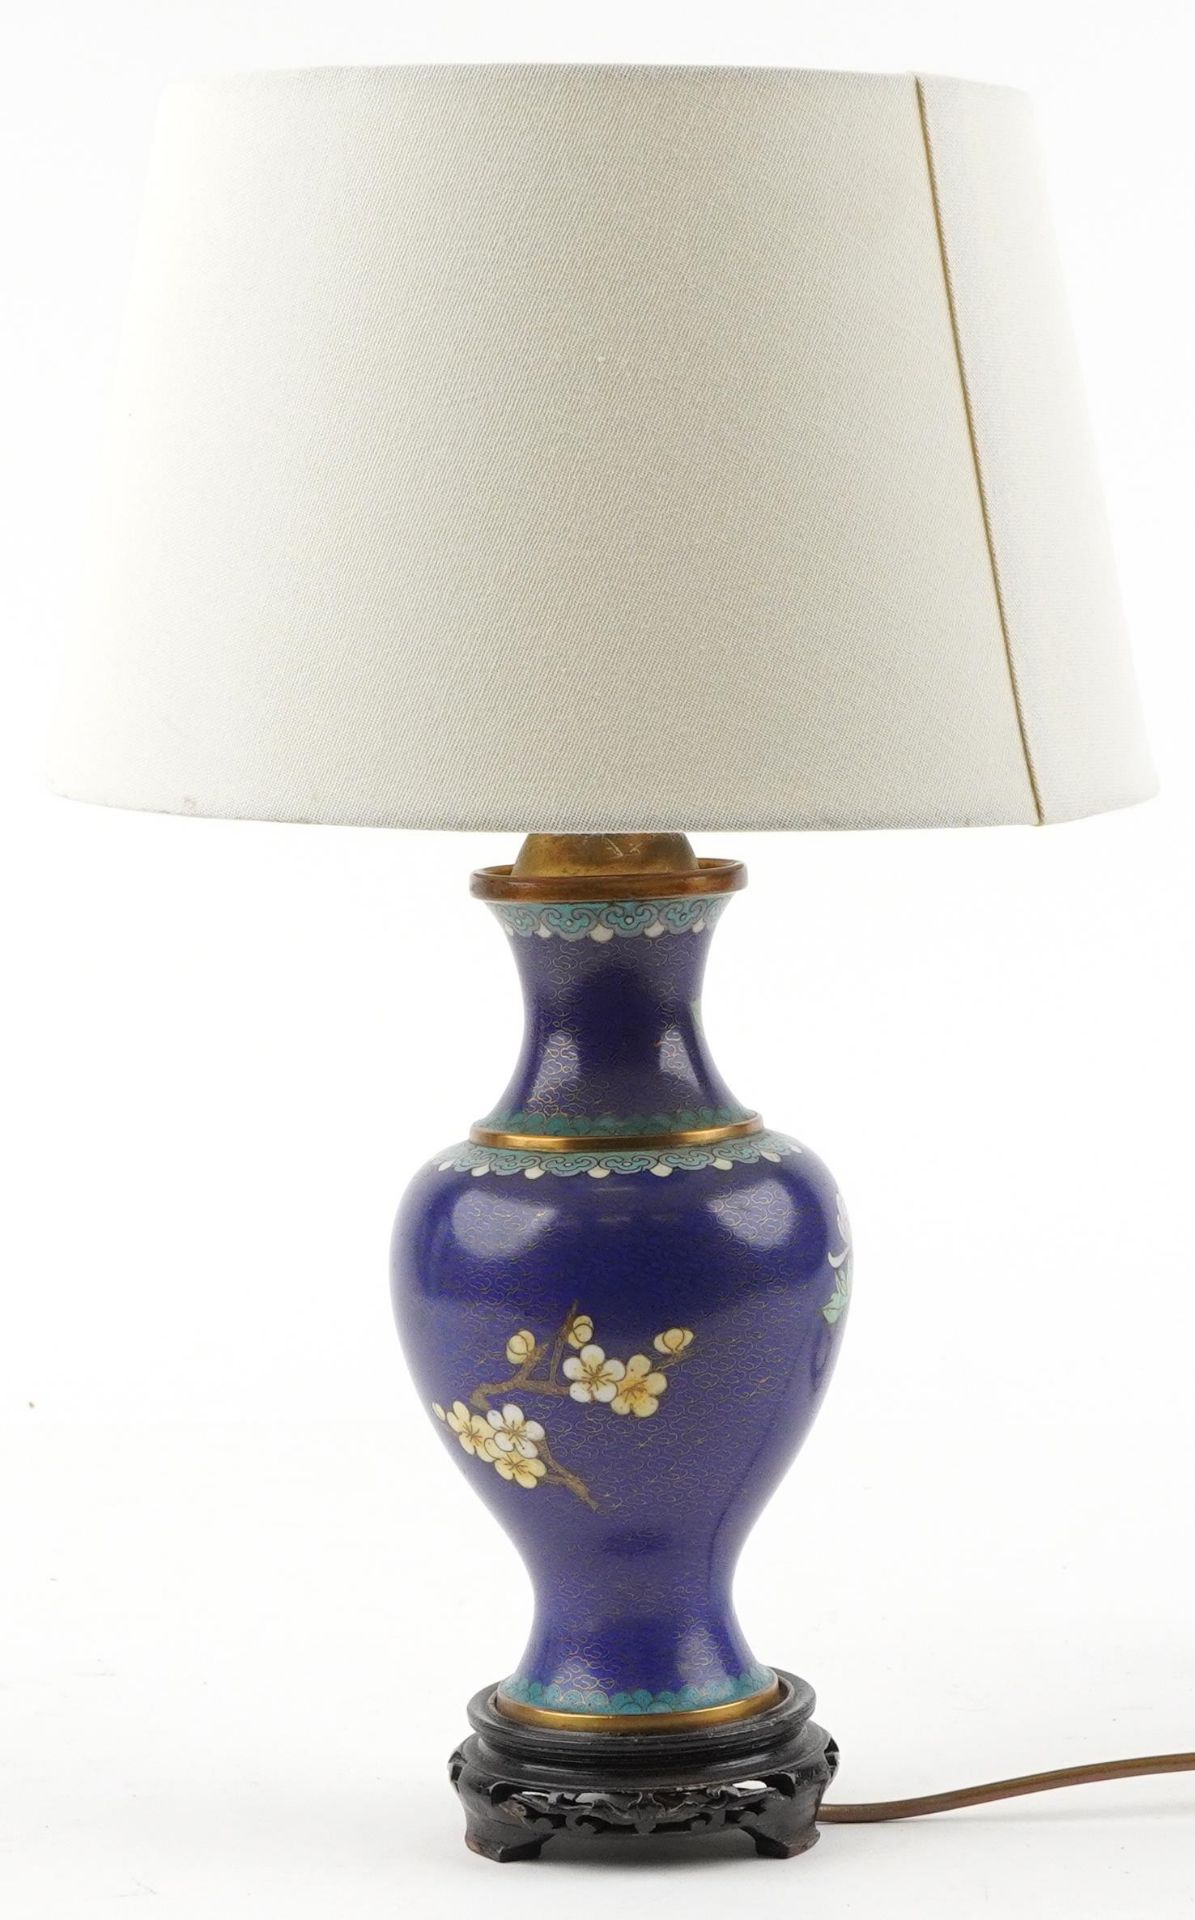 Chinese cloisonne baluster vase table lamp with shade enamelled with a bird amongst flowers, - Image 2 of 3